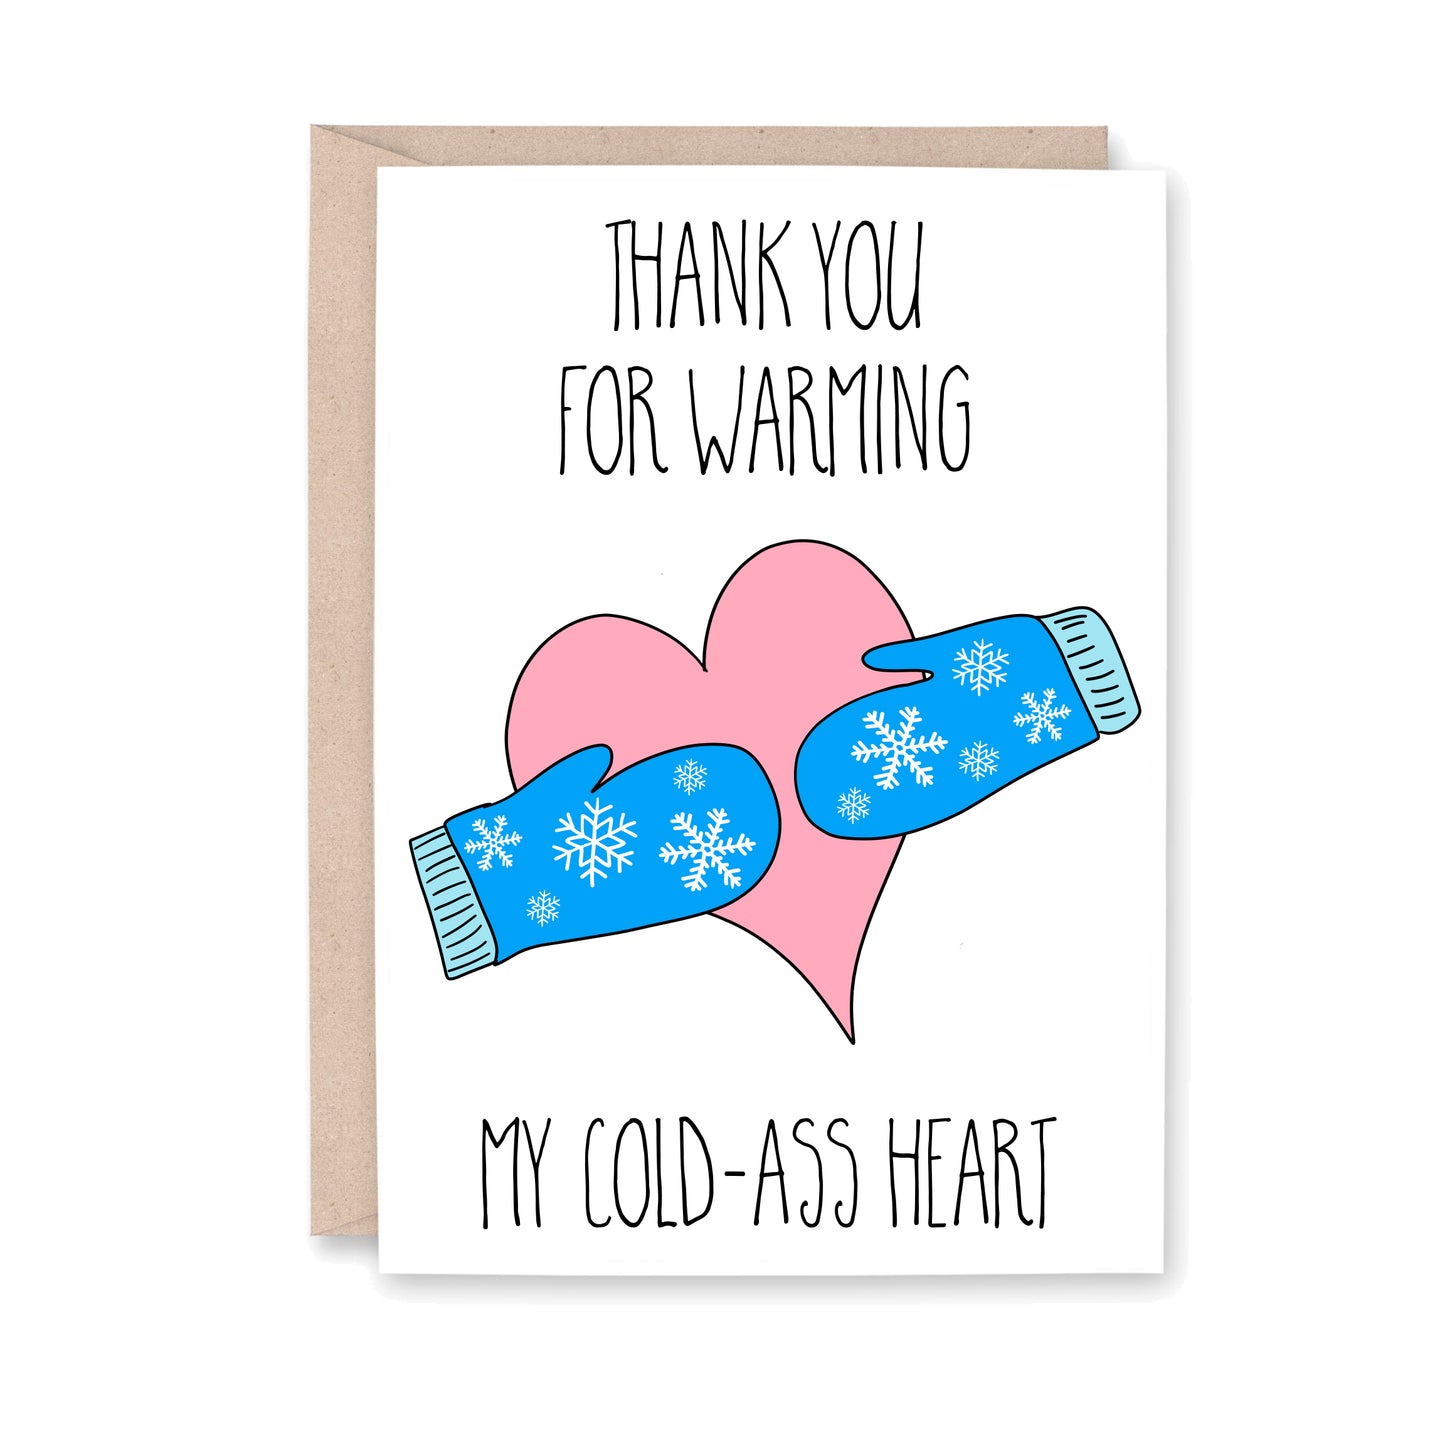 Greeting card that reads "Thank yo ufor warming my cold-ass heart" with an illustration of a pink heart with blue winter gloves with snowflakes on them.